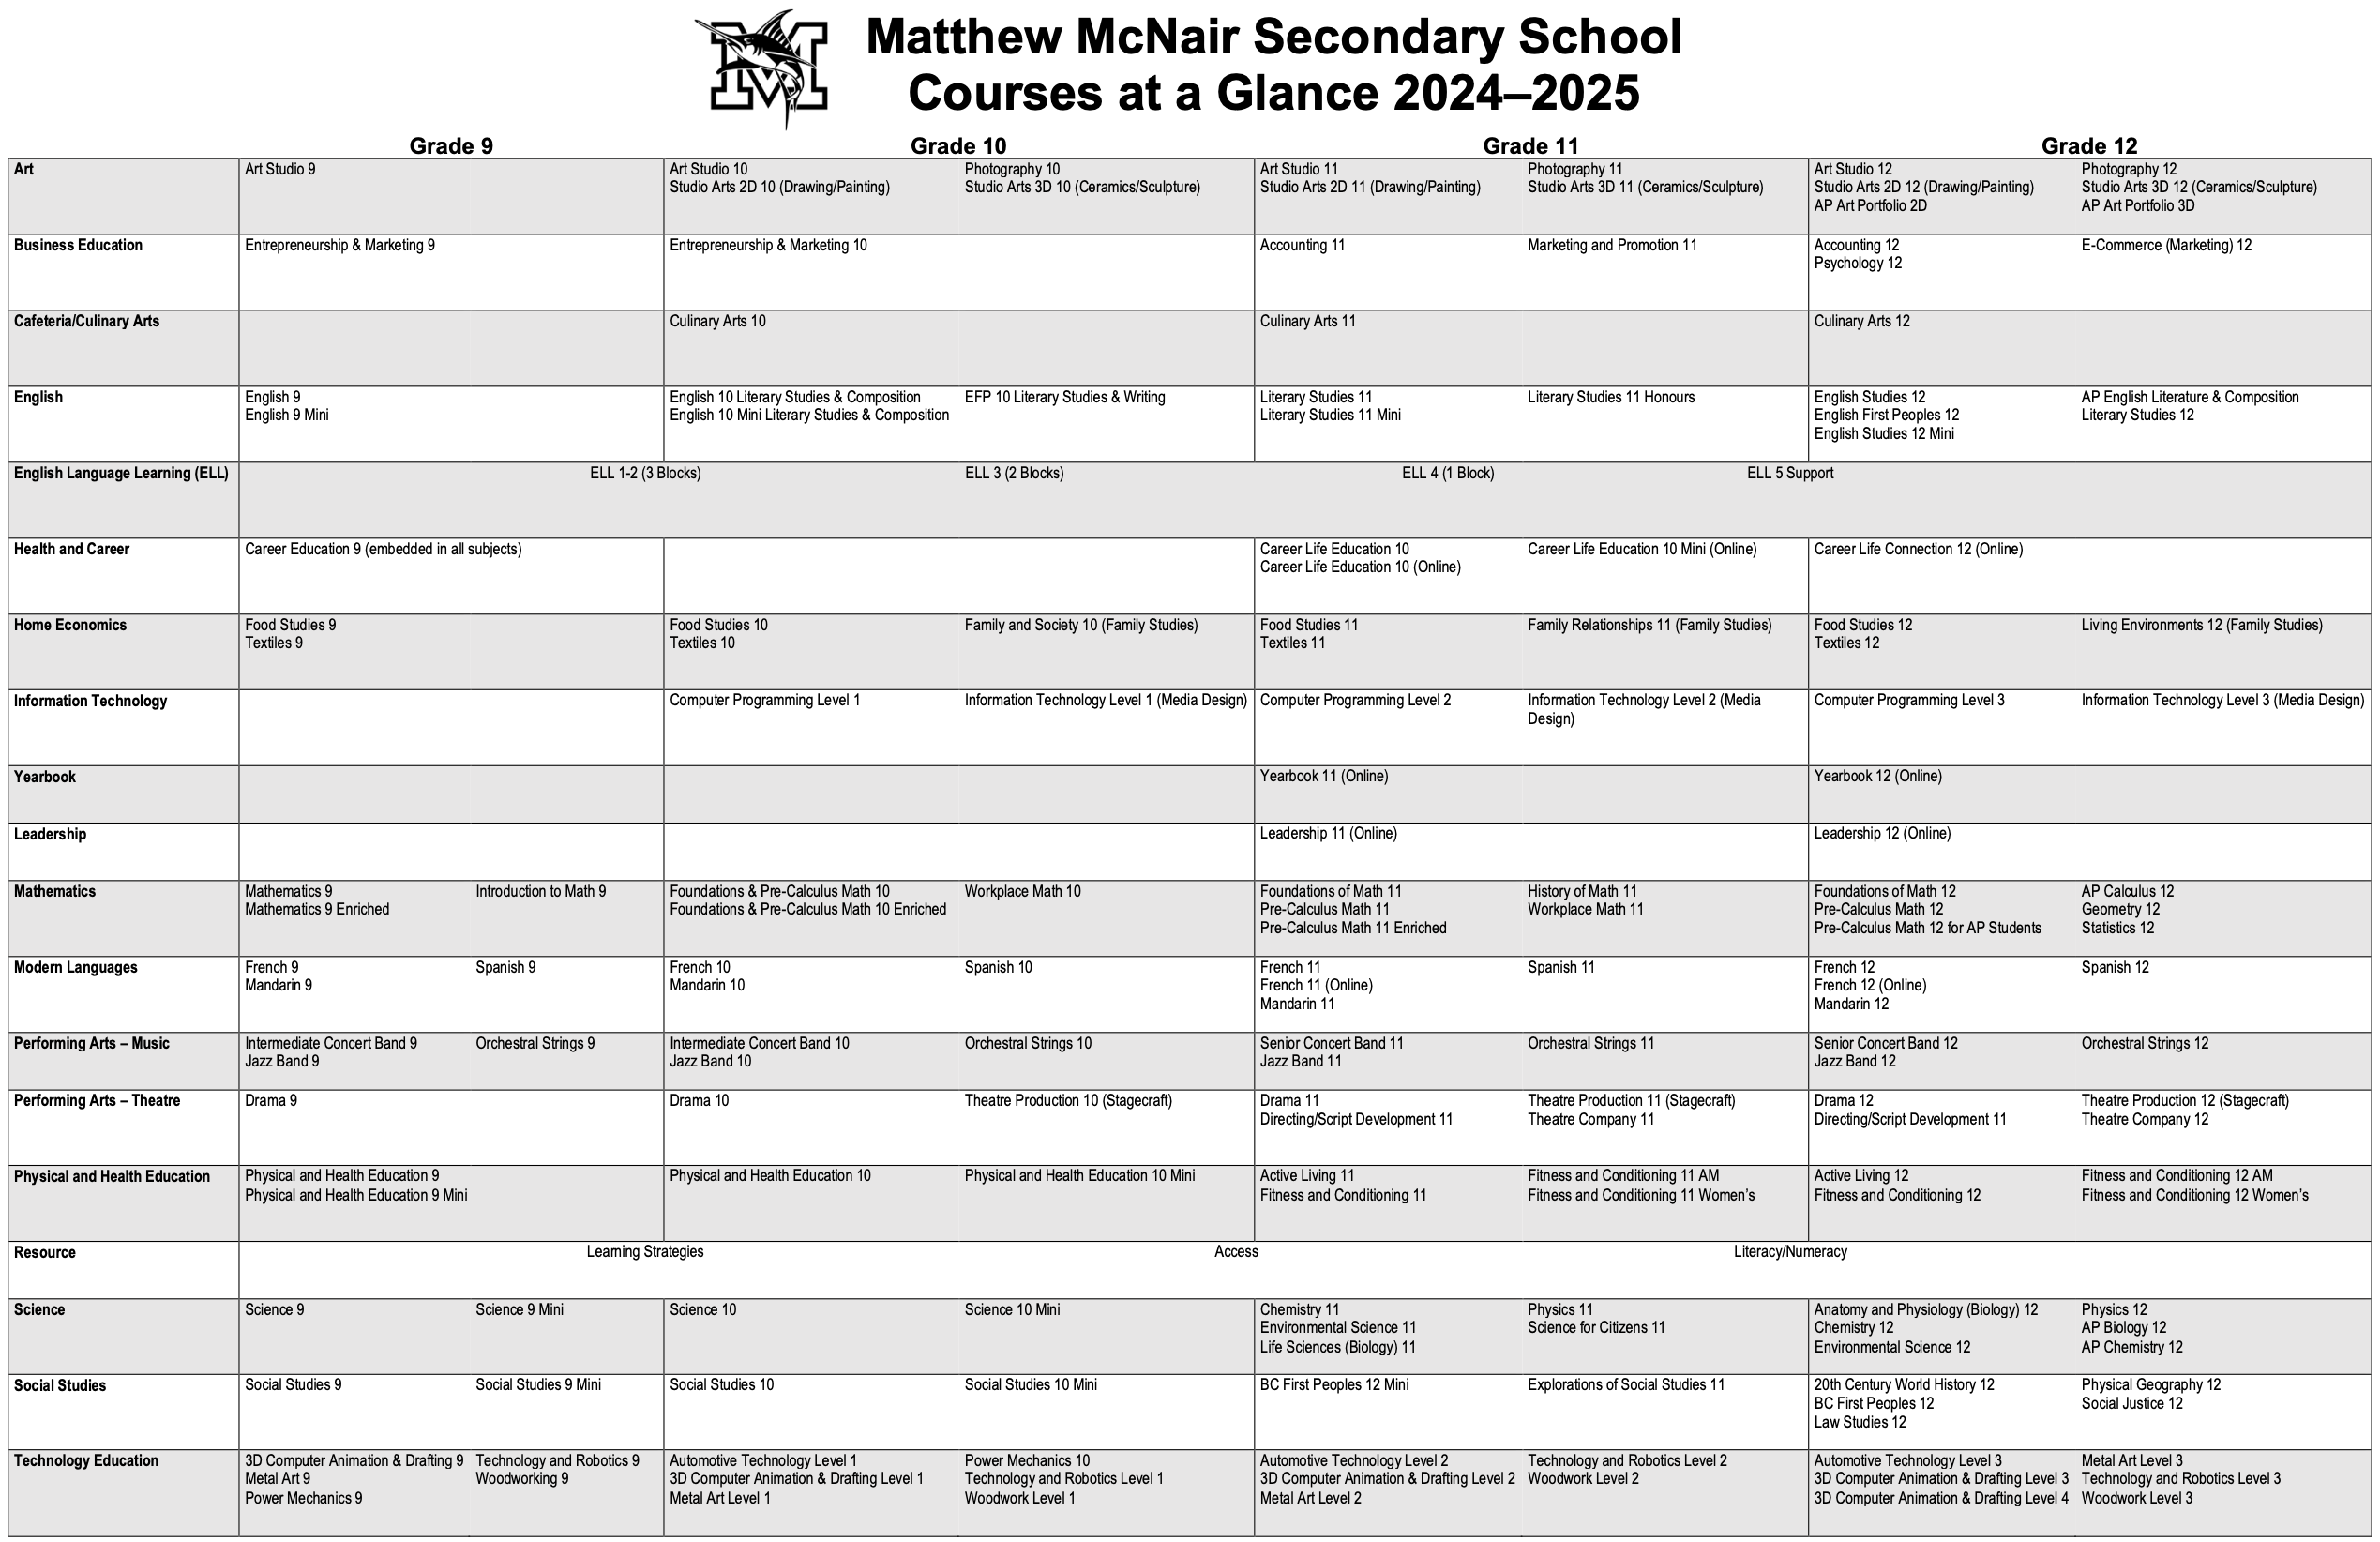 Courses at a Glance